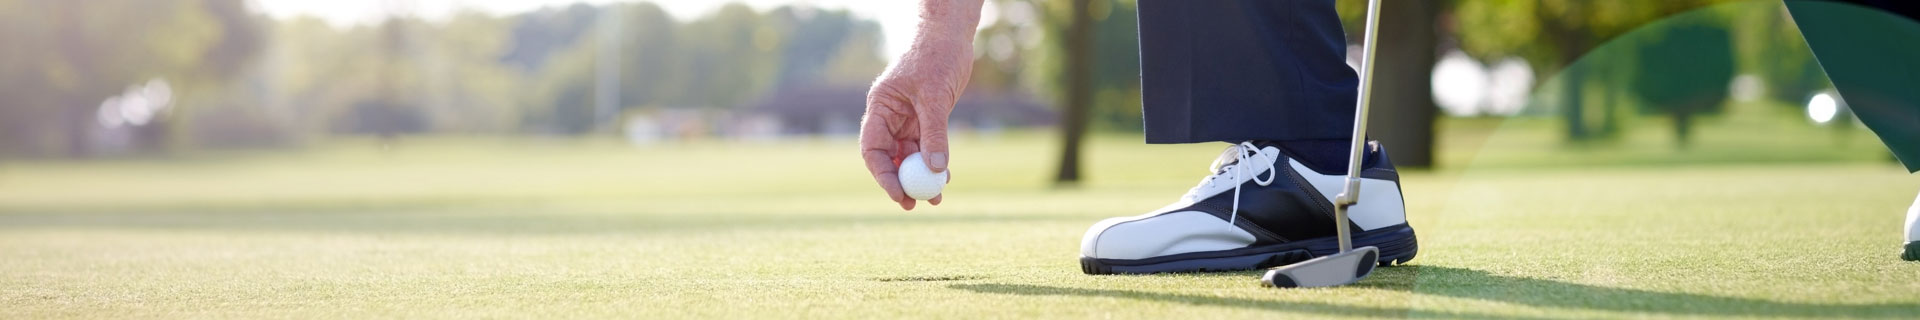 man places golf ball on the green to putt